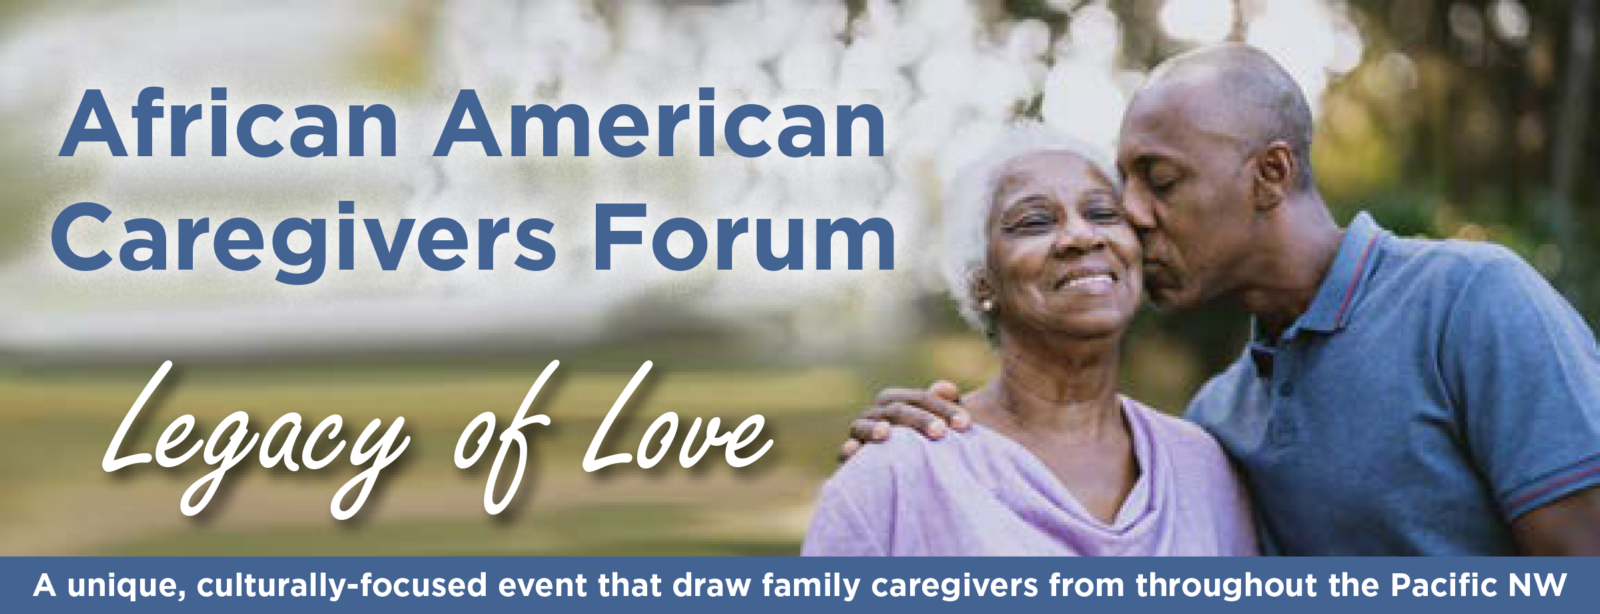 Legacy of Love African American Caregiver Forum . A unique, culturally-focused event that draw family caregivers from throughout the Pacific NW.